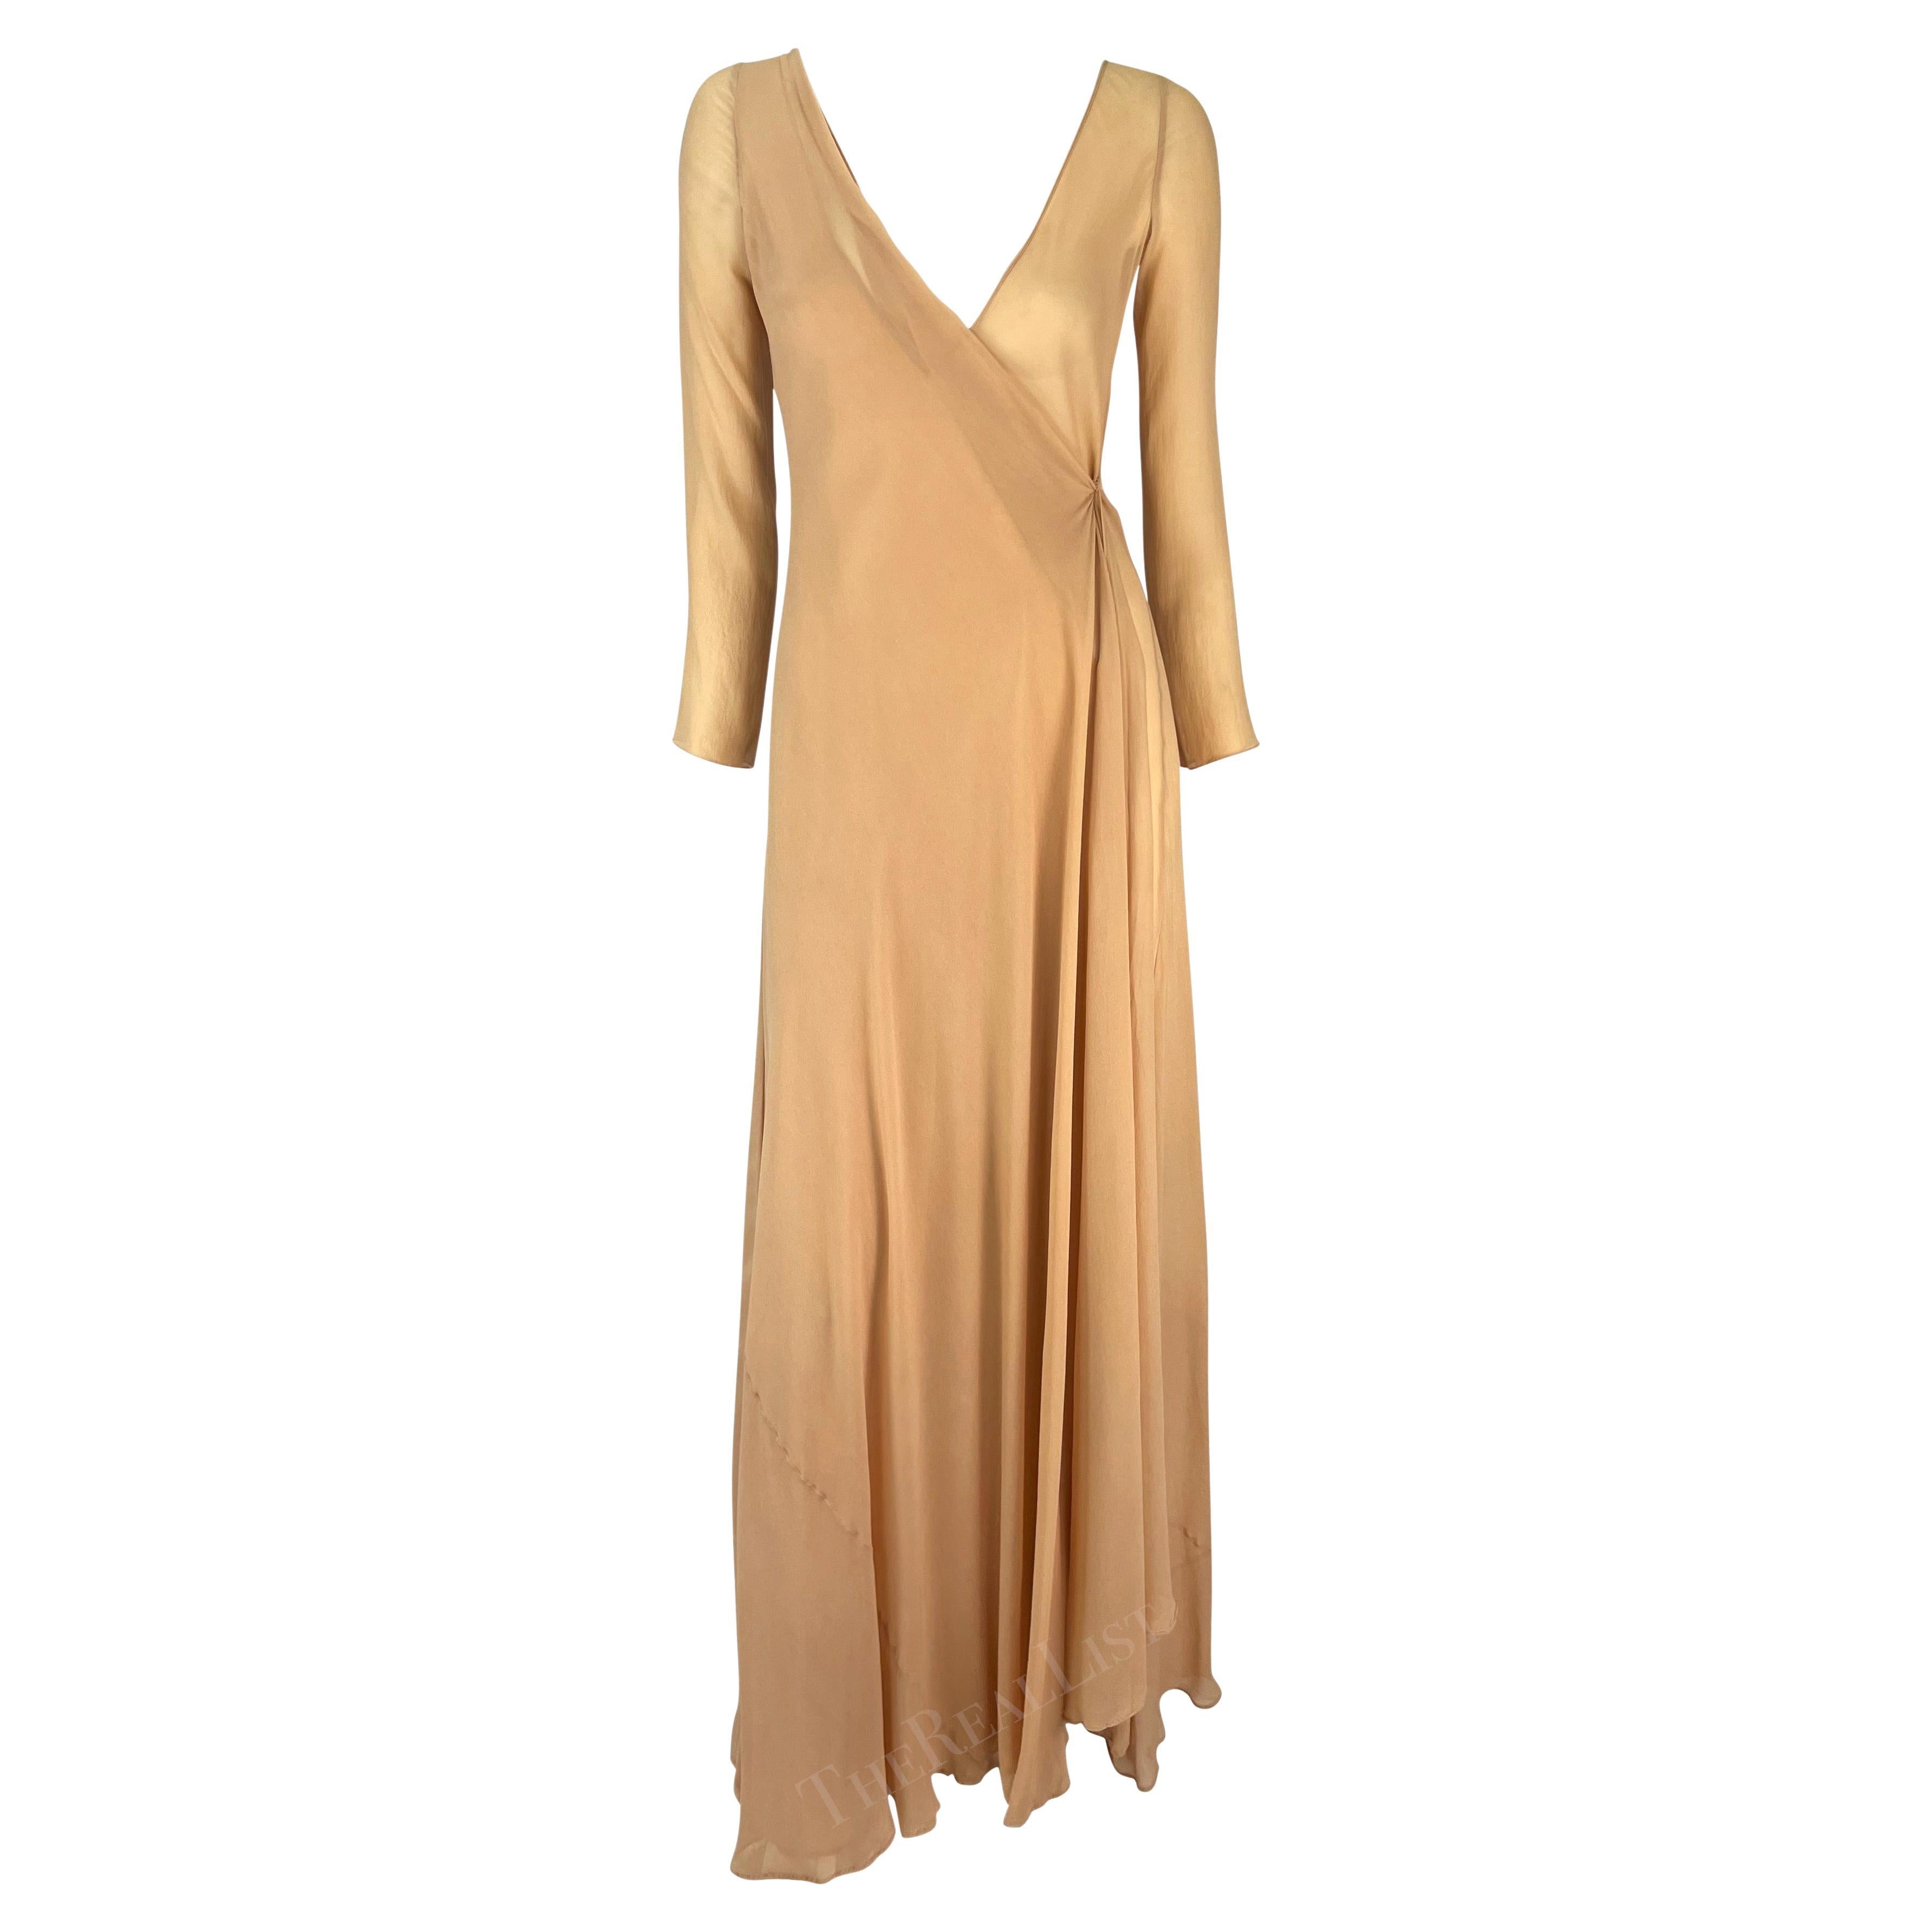 S/S 1998 Gucci by Tom Ford Beige Sheer Wrap Floor Length Sample Gown  For Sale